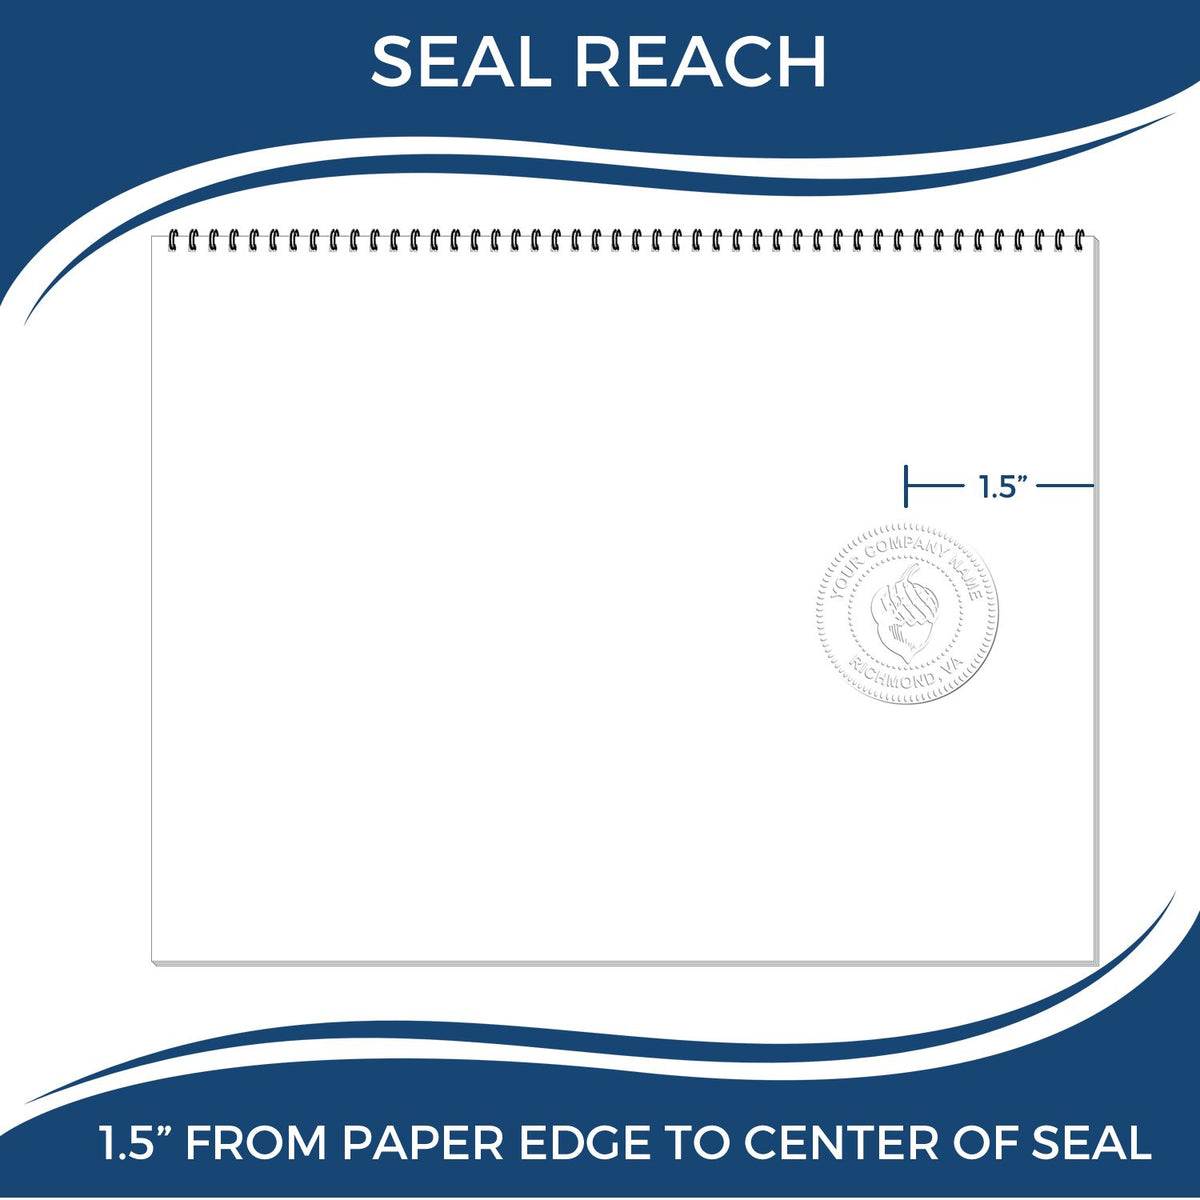 An infographic showing the seal reach which is represented by a ruler and a miniature seal image of the Rhode Island Desk Architect Embossing Seal